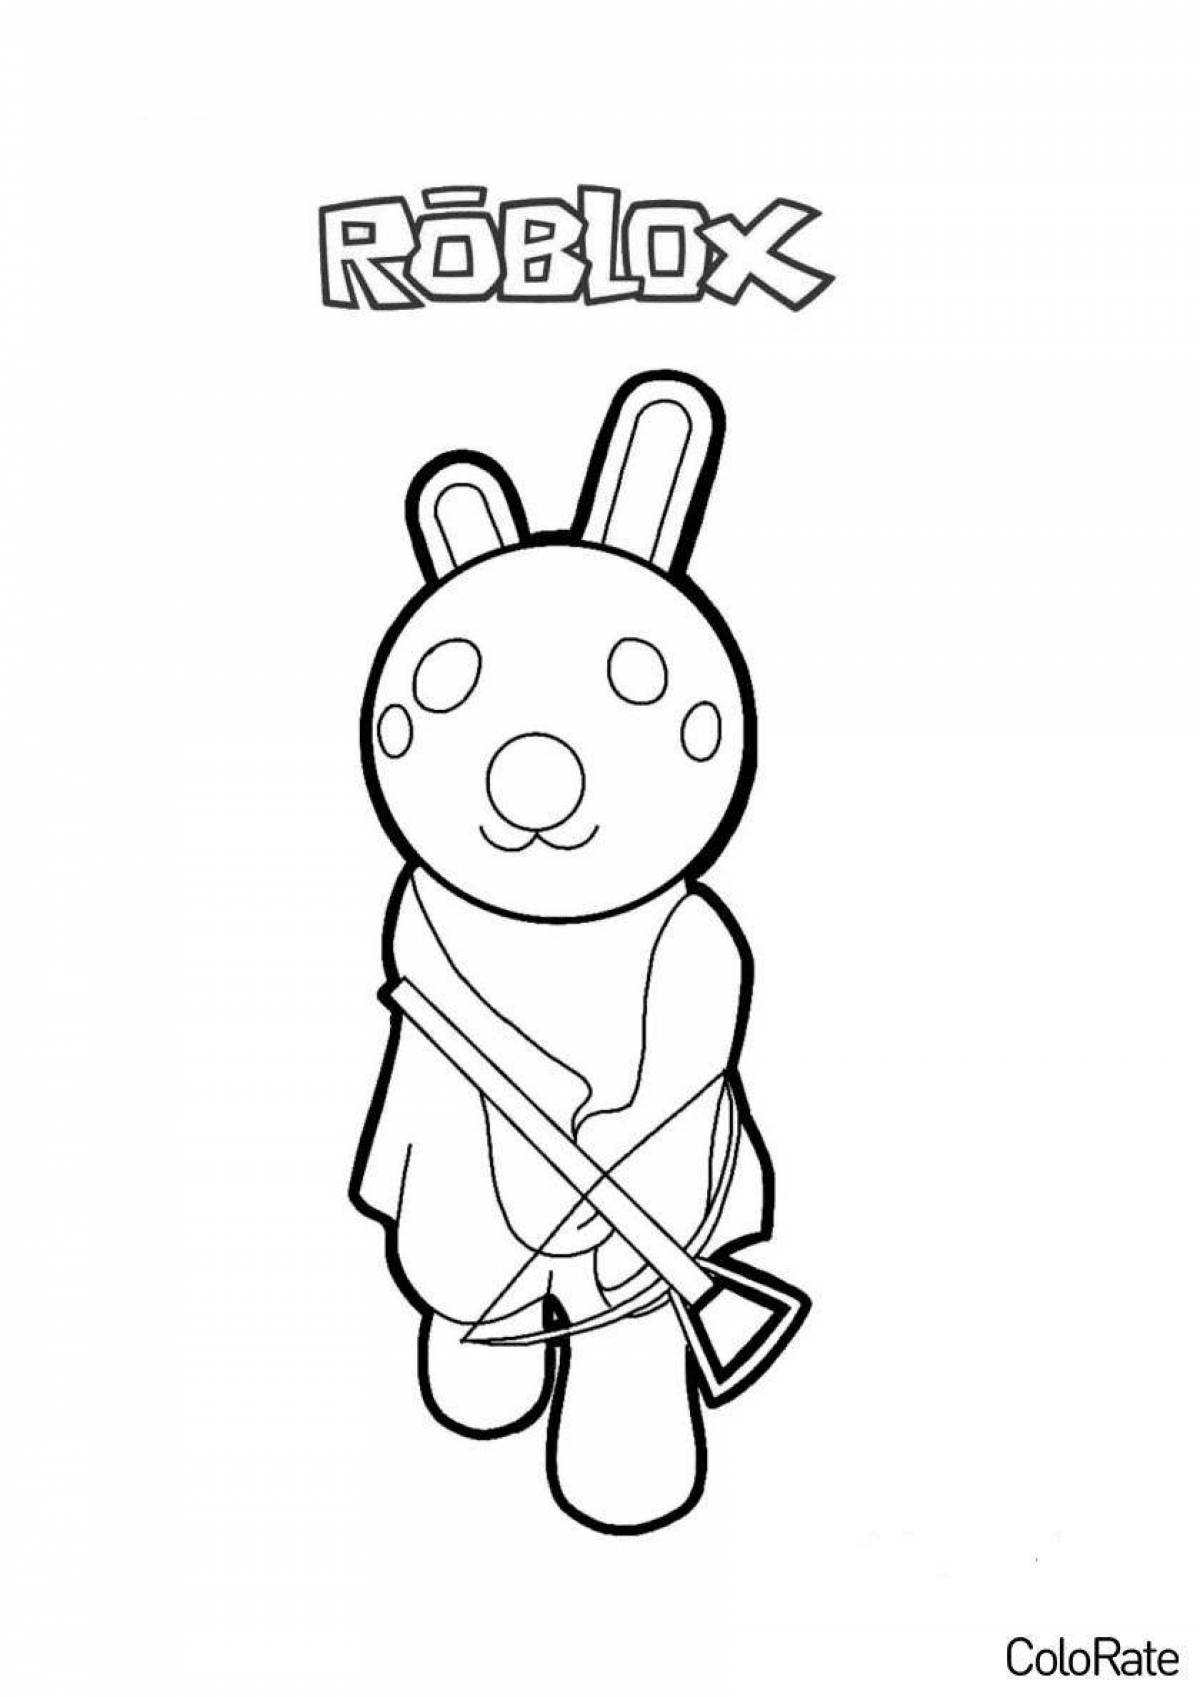 Roblox cute pig coloring page